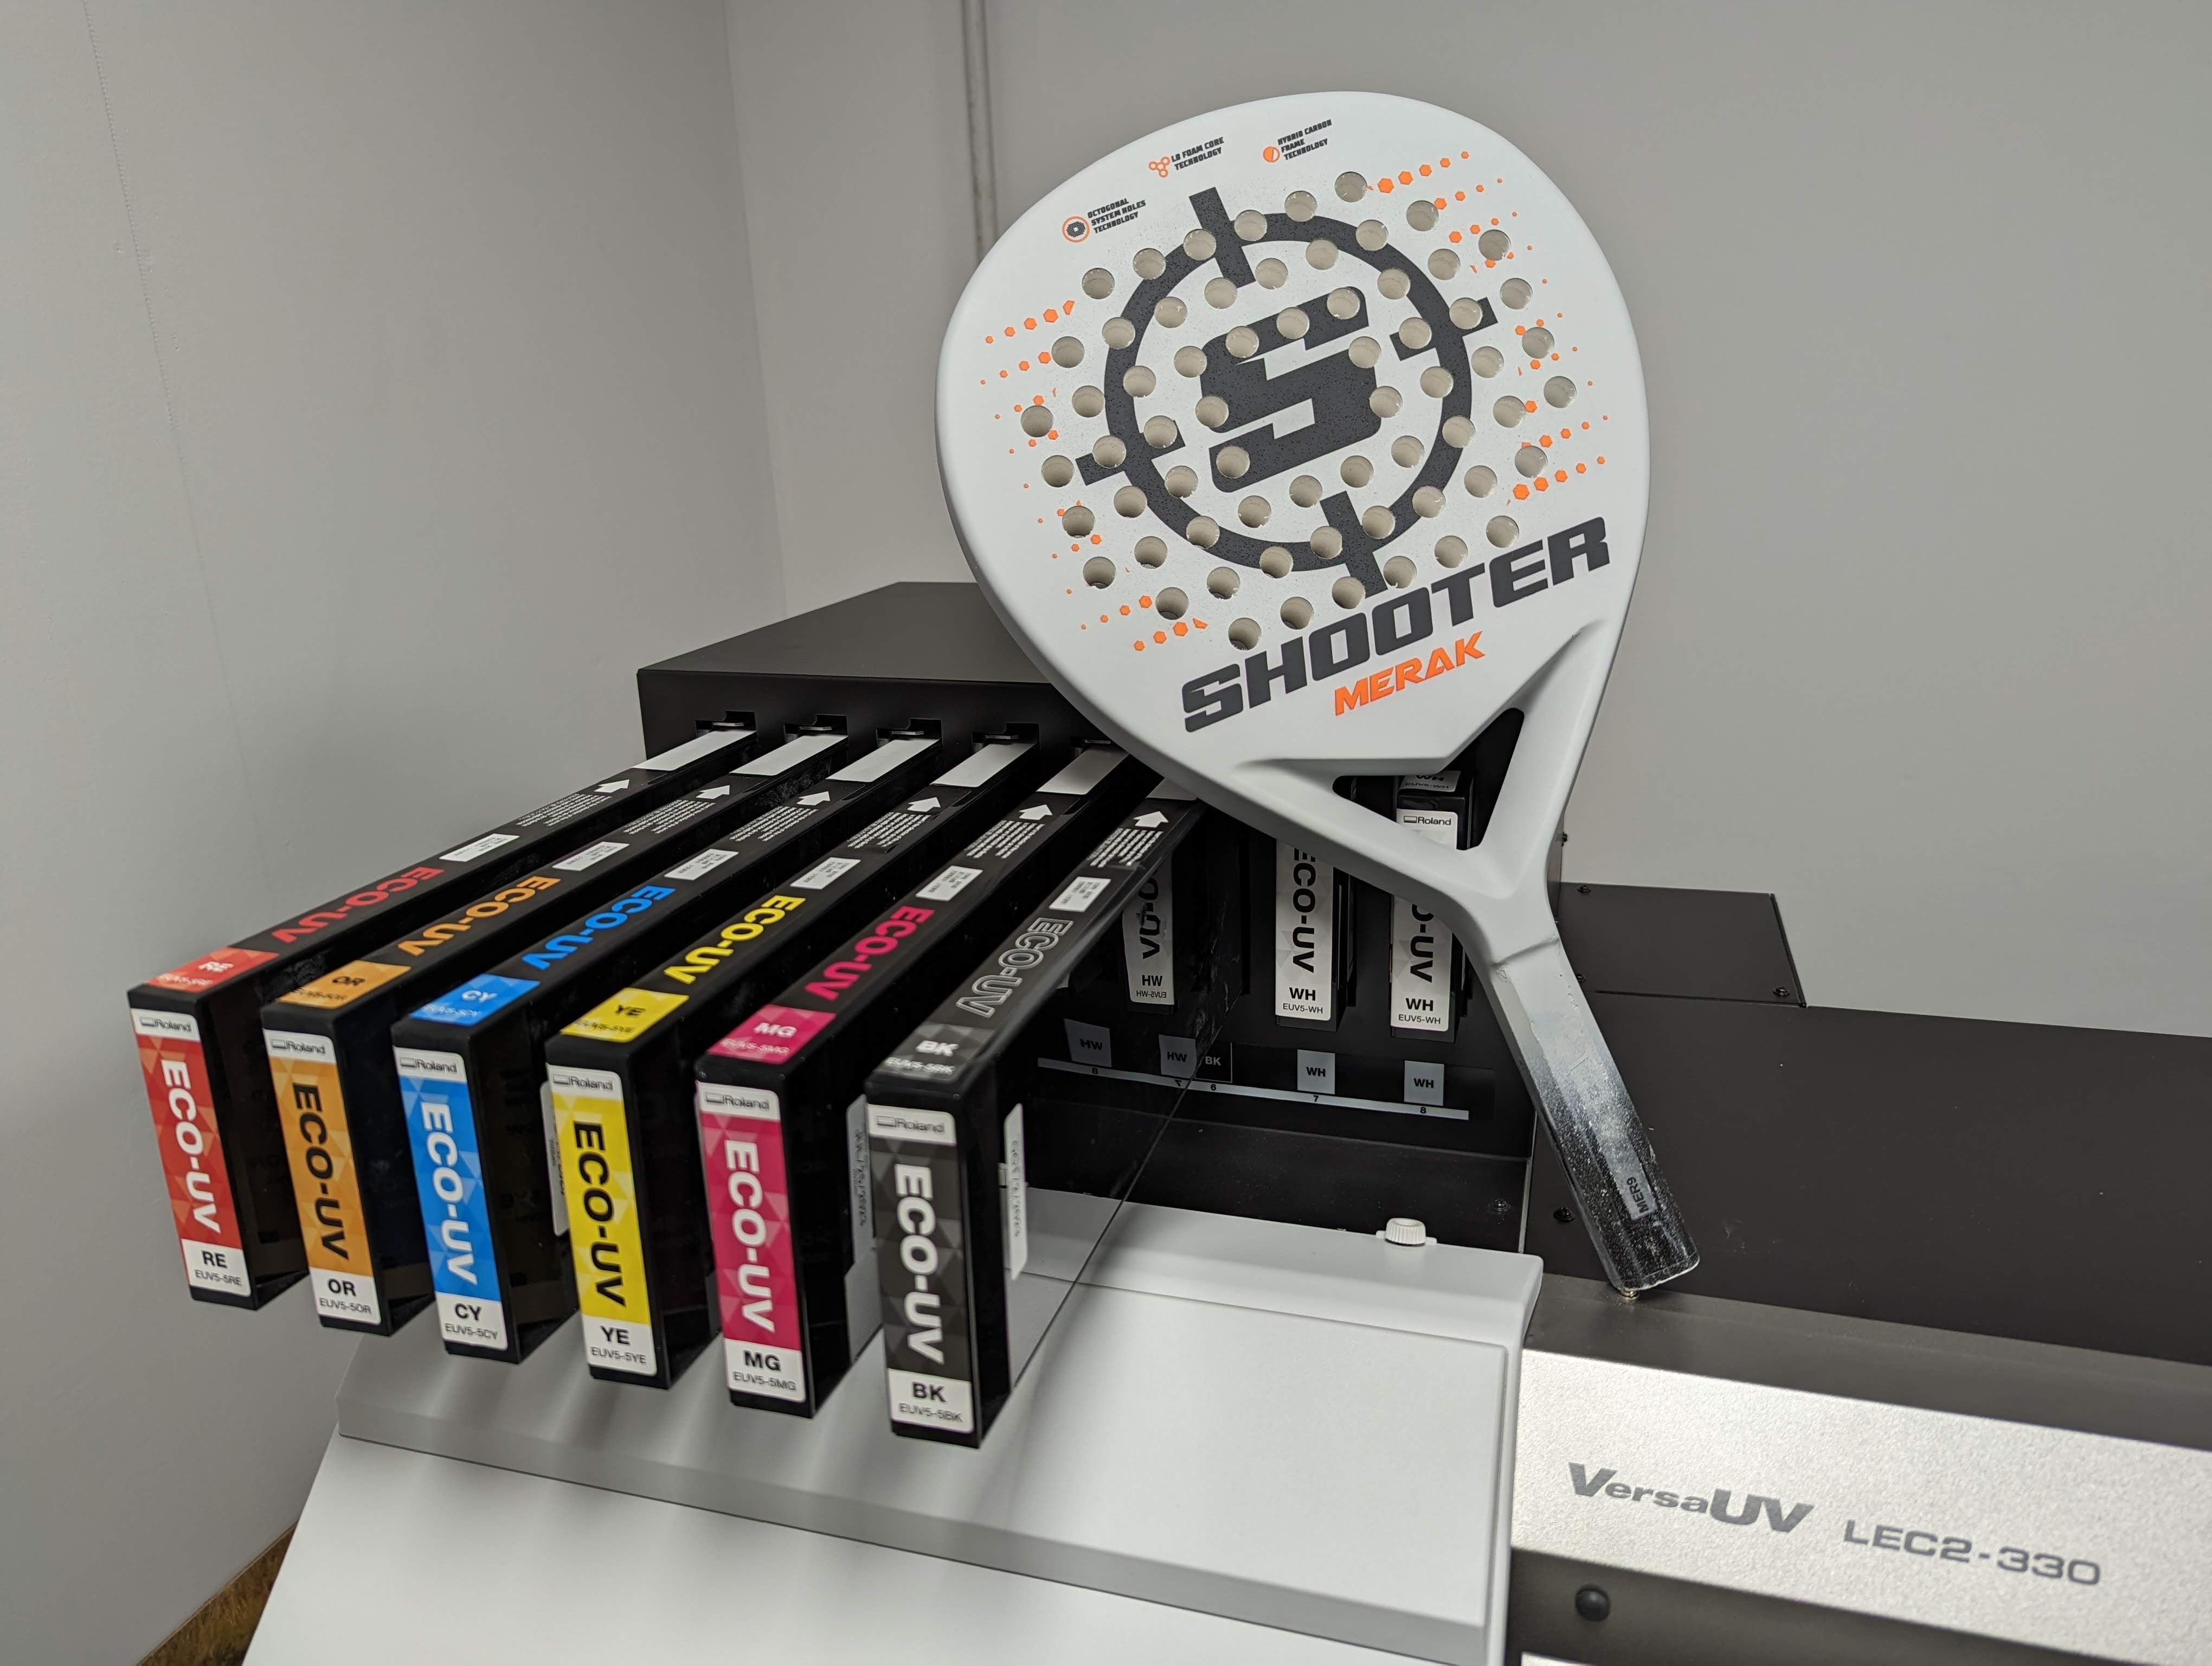 Shooter Padel personalised racquet